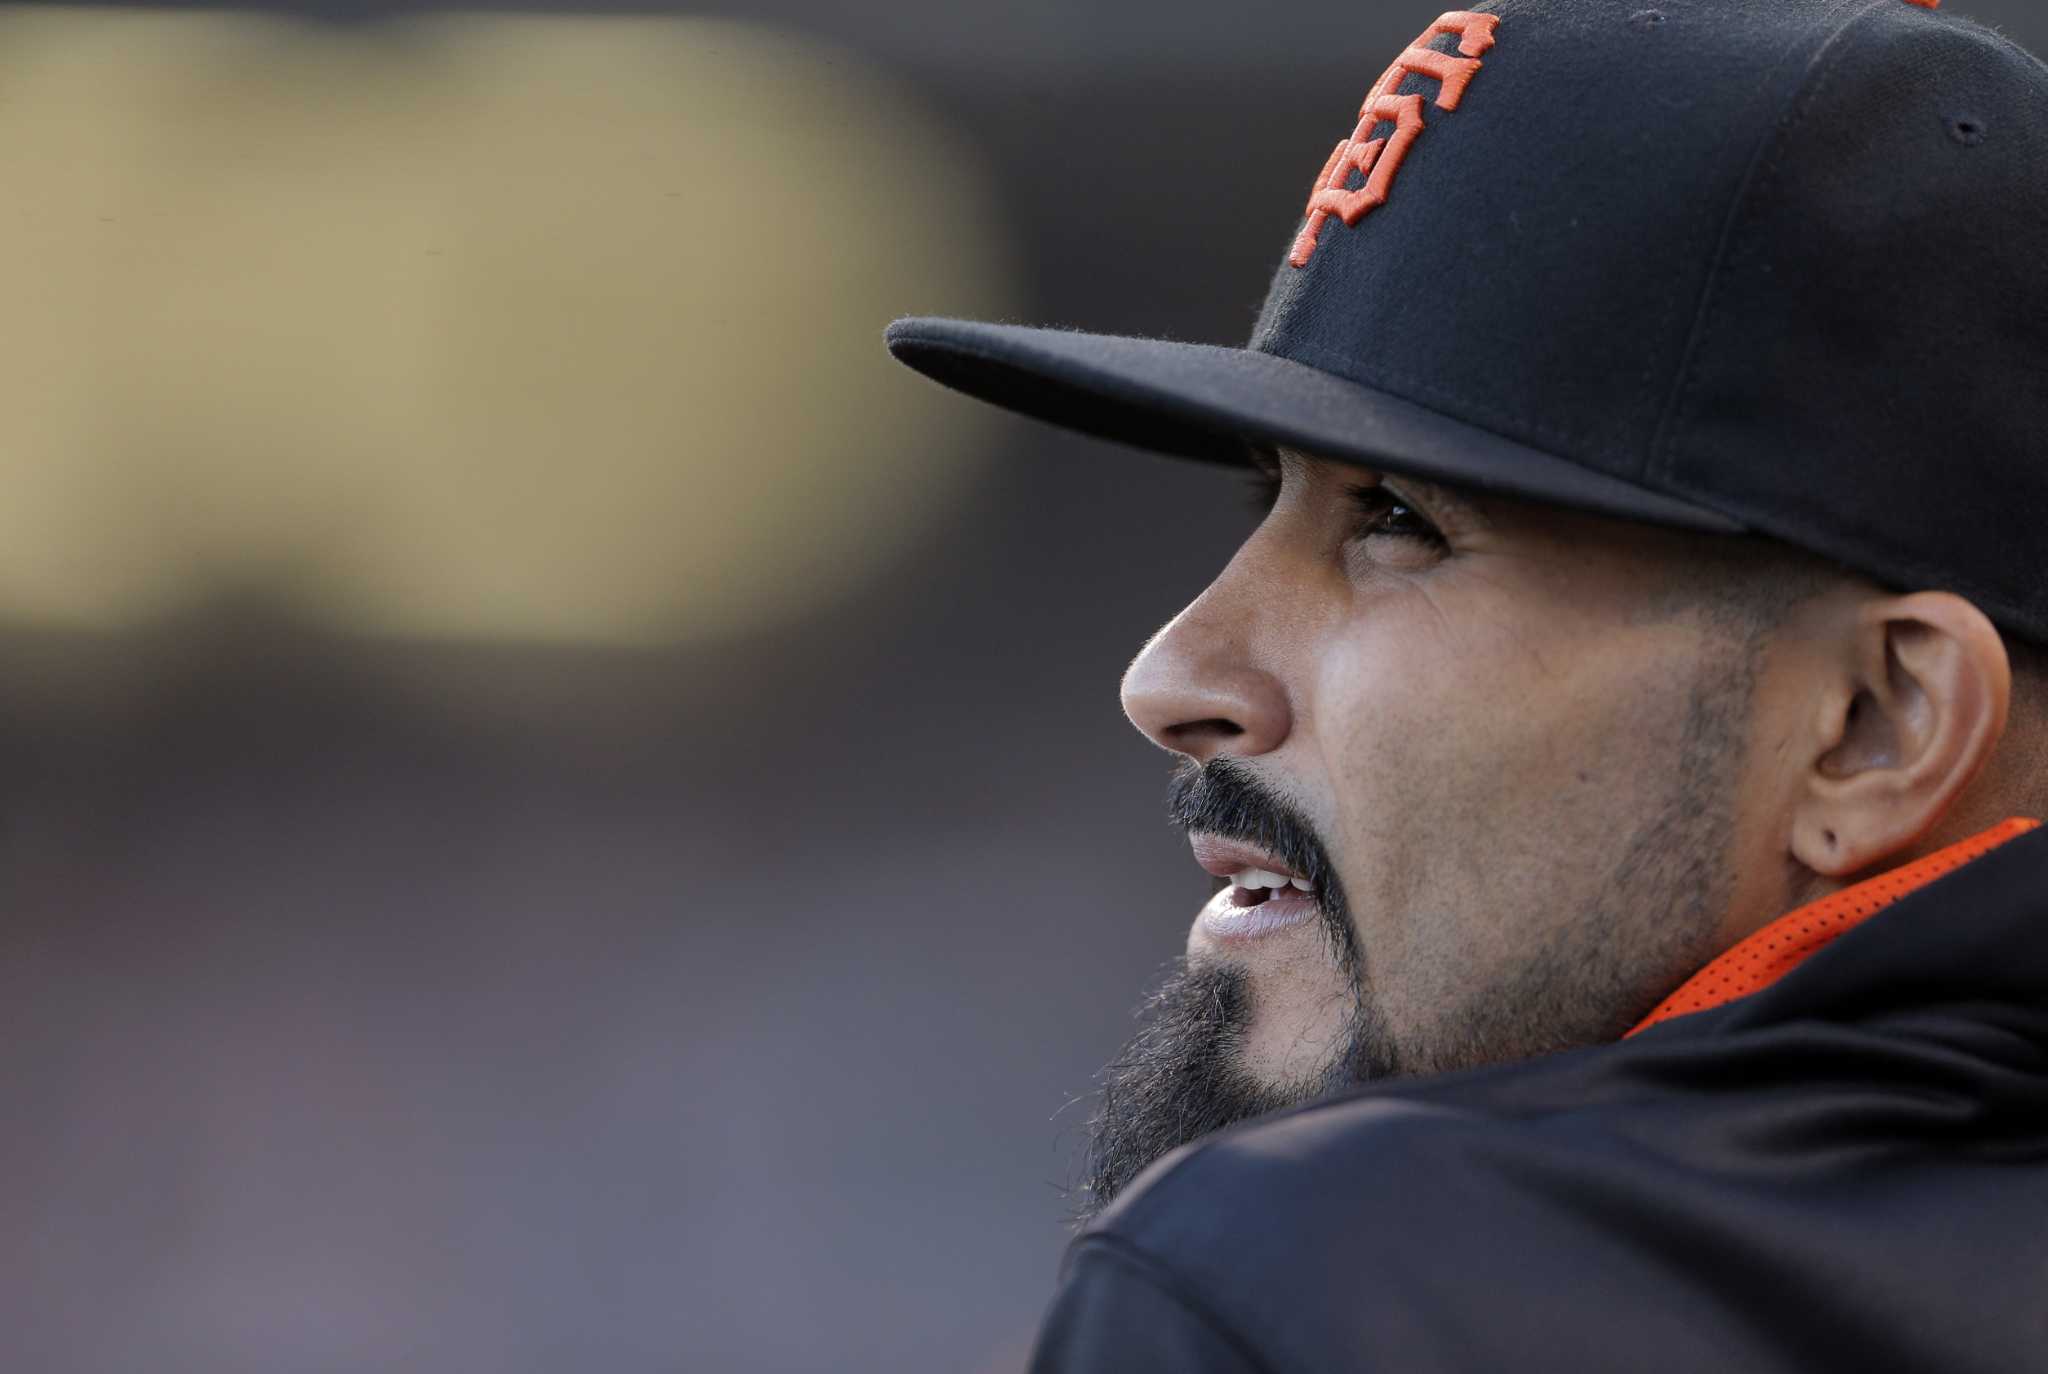 Sergio Romo is really going to the Dodgers - McCovey Chronicles